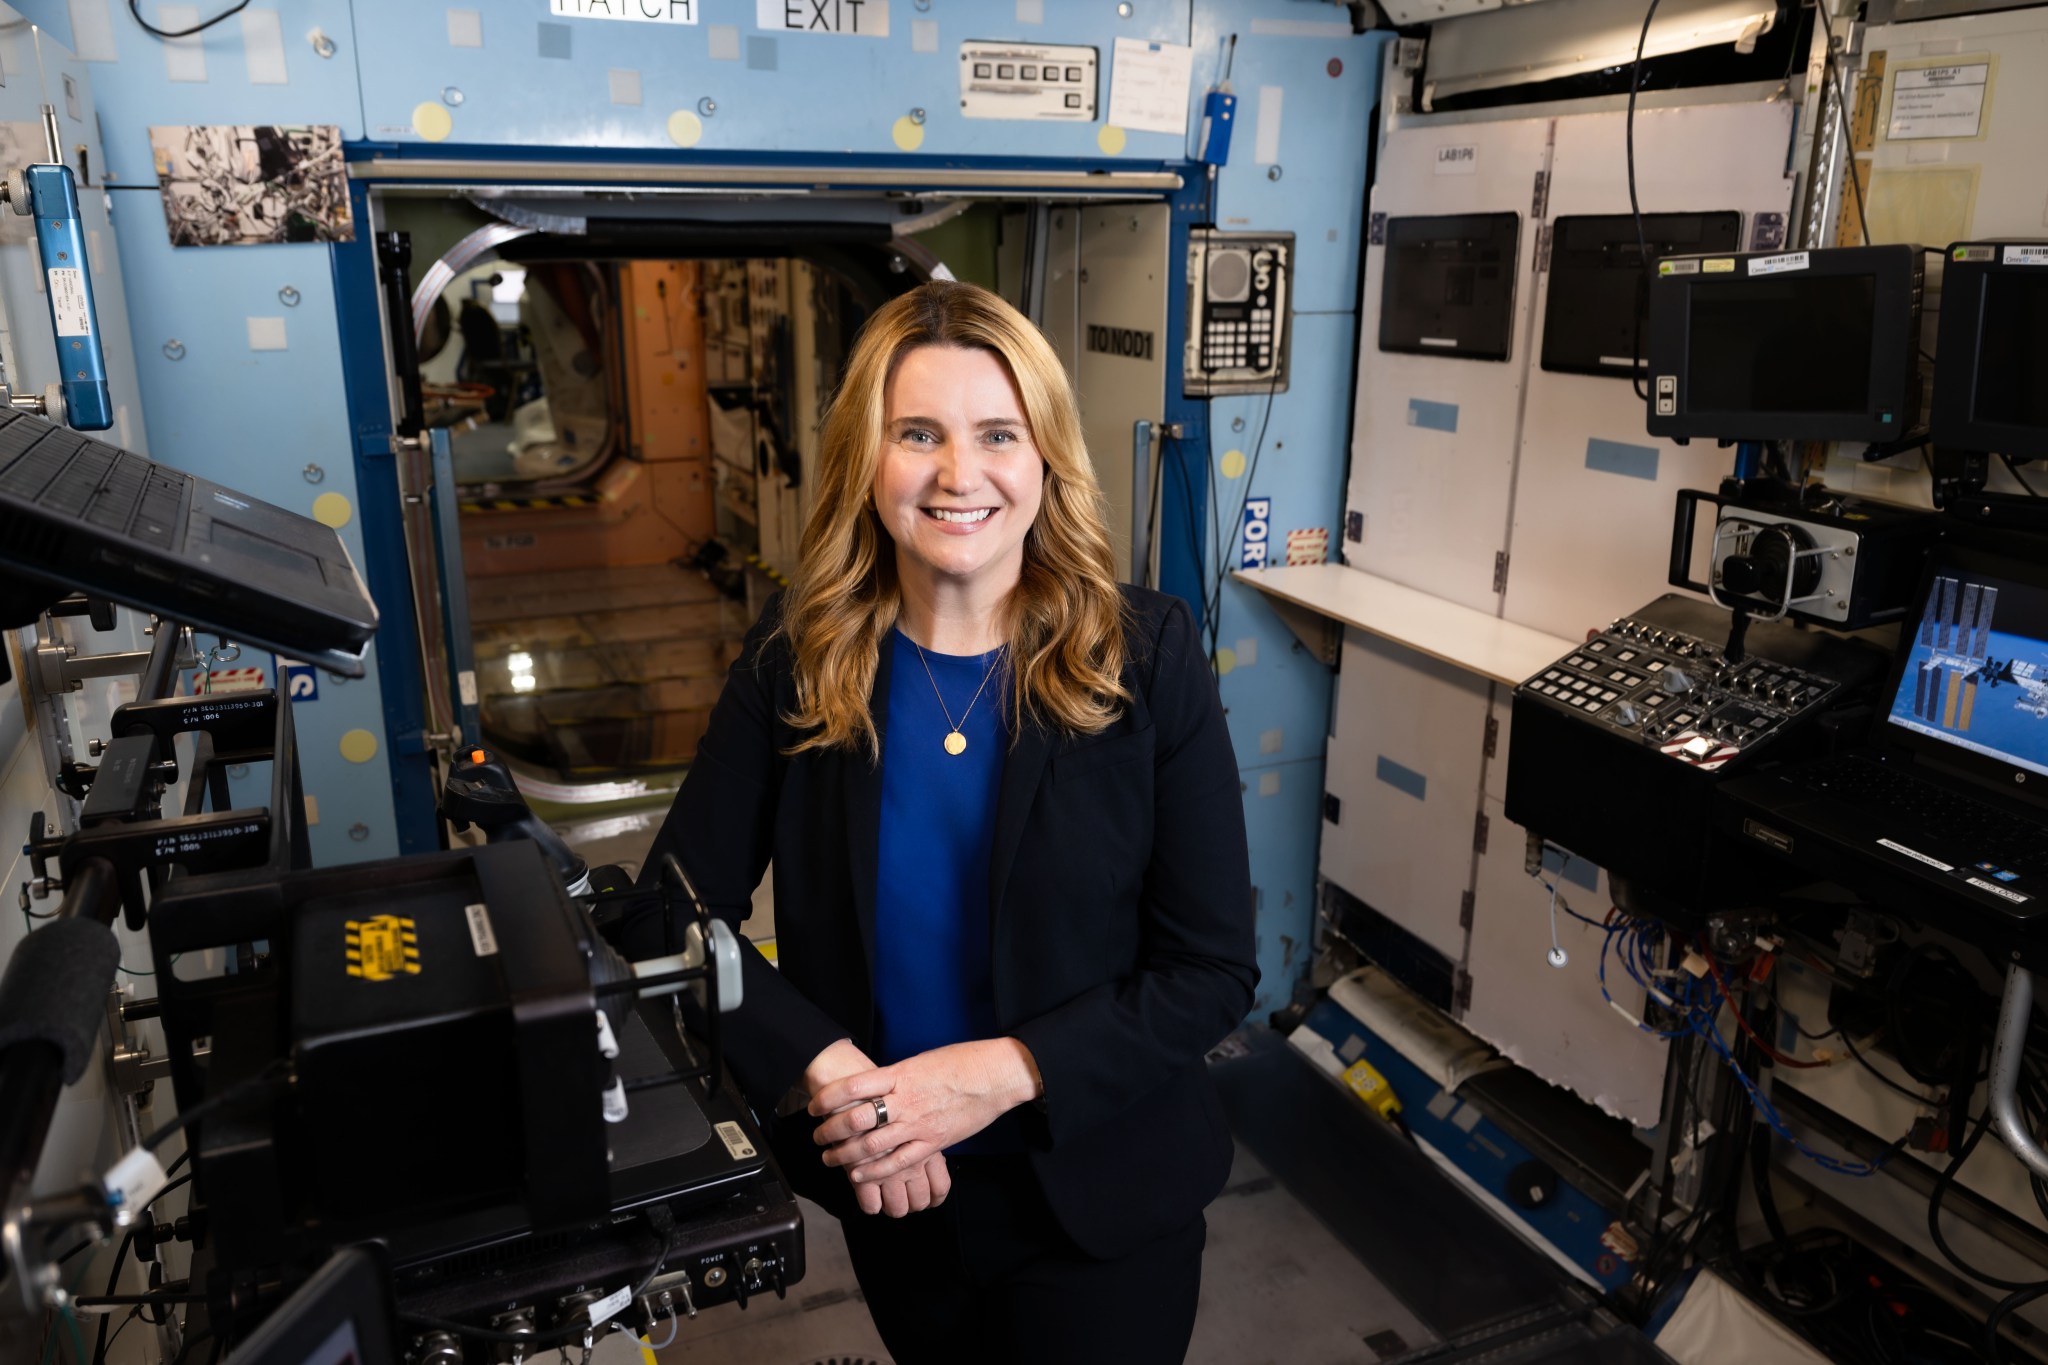 A woman with wavy blonde hair slightly past her shoulders smiles at the camera with one hand over the other as she leans against equipment inside one of the International Space Station modules inside the Space Vehicle Mockup Facility at NASA's Johnson Space Center. She is wearing black dress pants, a blue blouse, and a black jacket, and a circular pendant is visible around her neck. Black computer equipment and white cabinets are seen against the left and right walls of the module, and a large rounded square opening to other modules is present behind Jennifer. The wall surrounding the opening is light blue, and there are many items and labels affixed to it. Blue handrails are present on both sides of the opening, as well as on one of the walls.